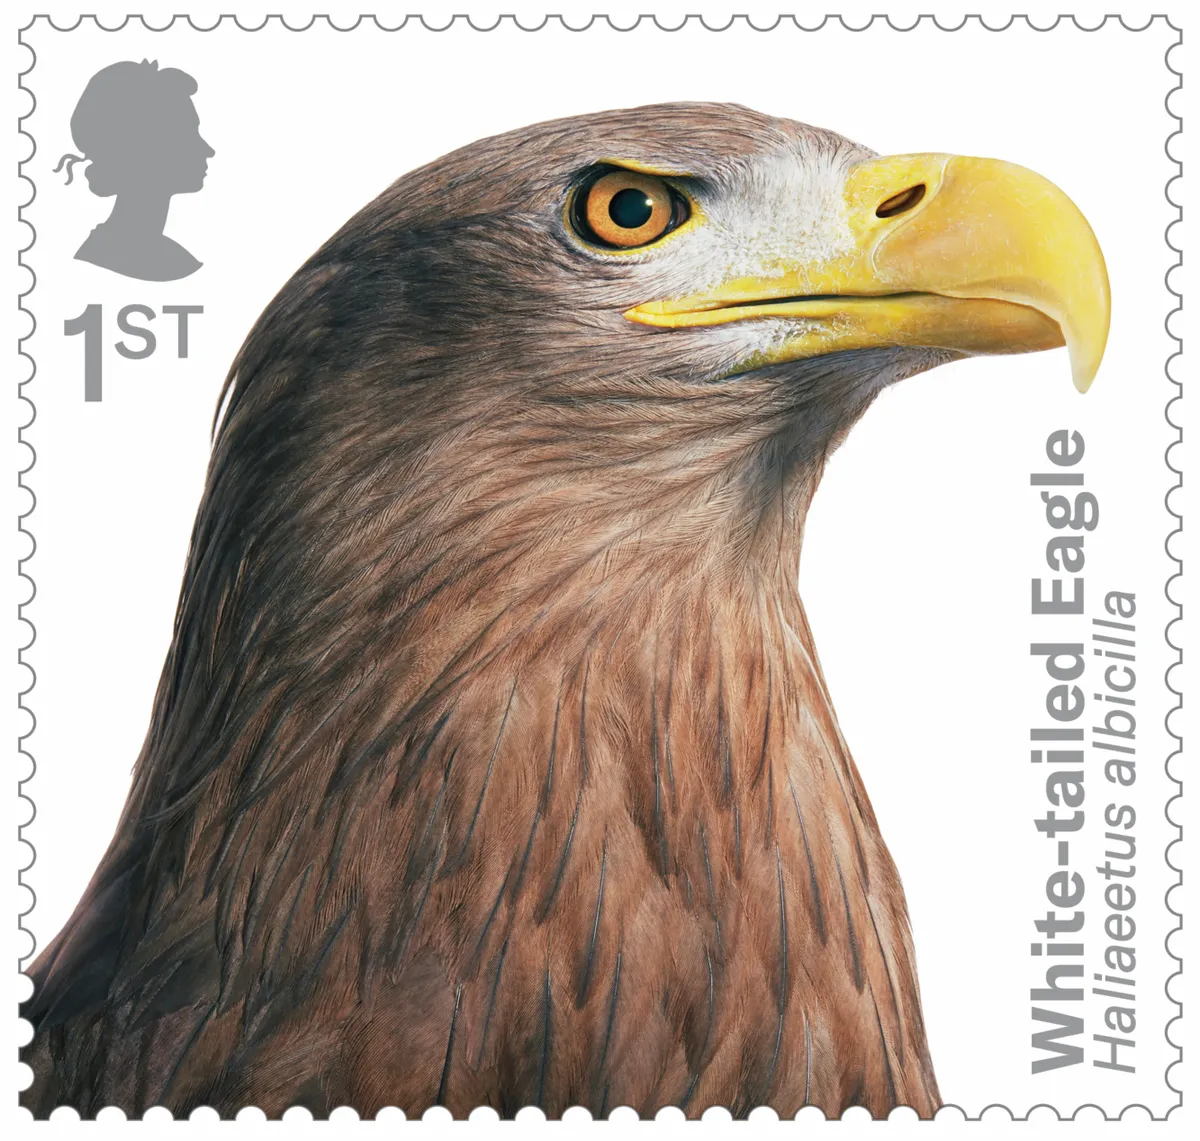 Bird of prey stamp collection - white-tailed eagle. © Tim Flach/Royal Mail.